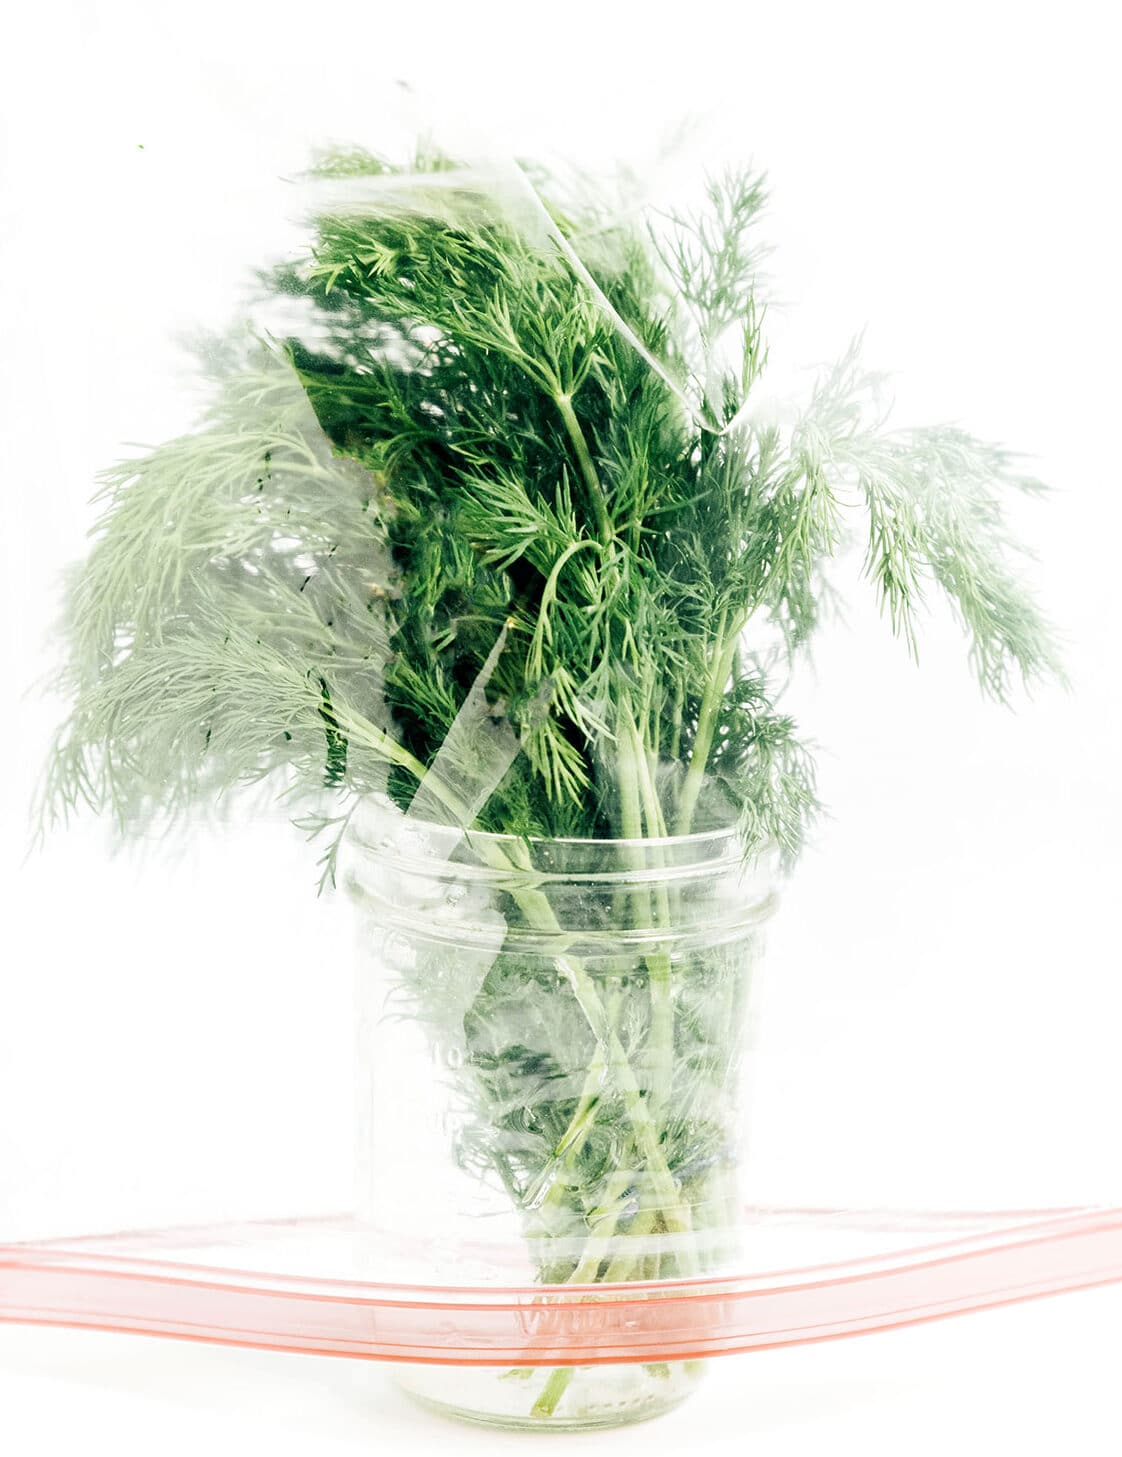 A plastic baggie on top of a bunch of dill resting inside a mason jar filled with water